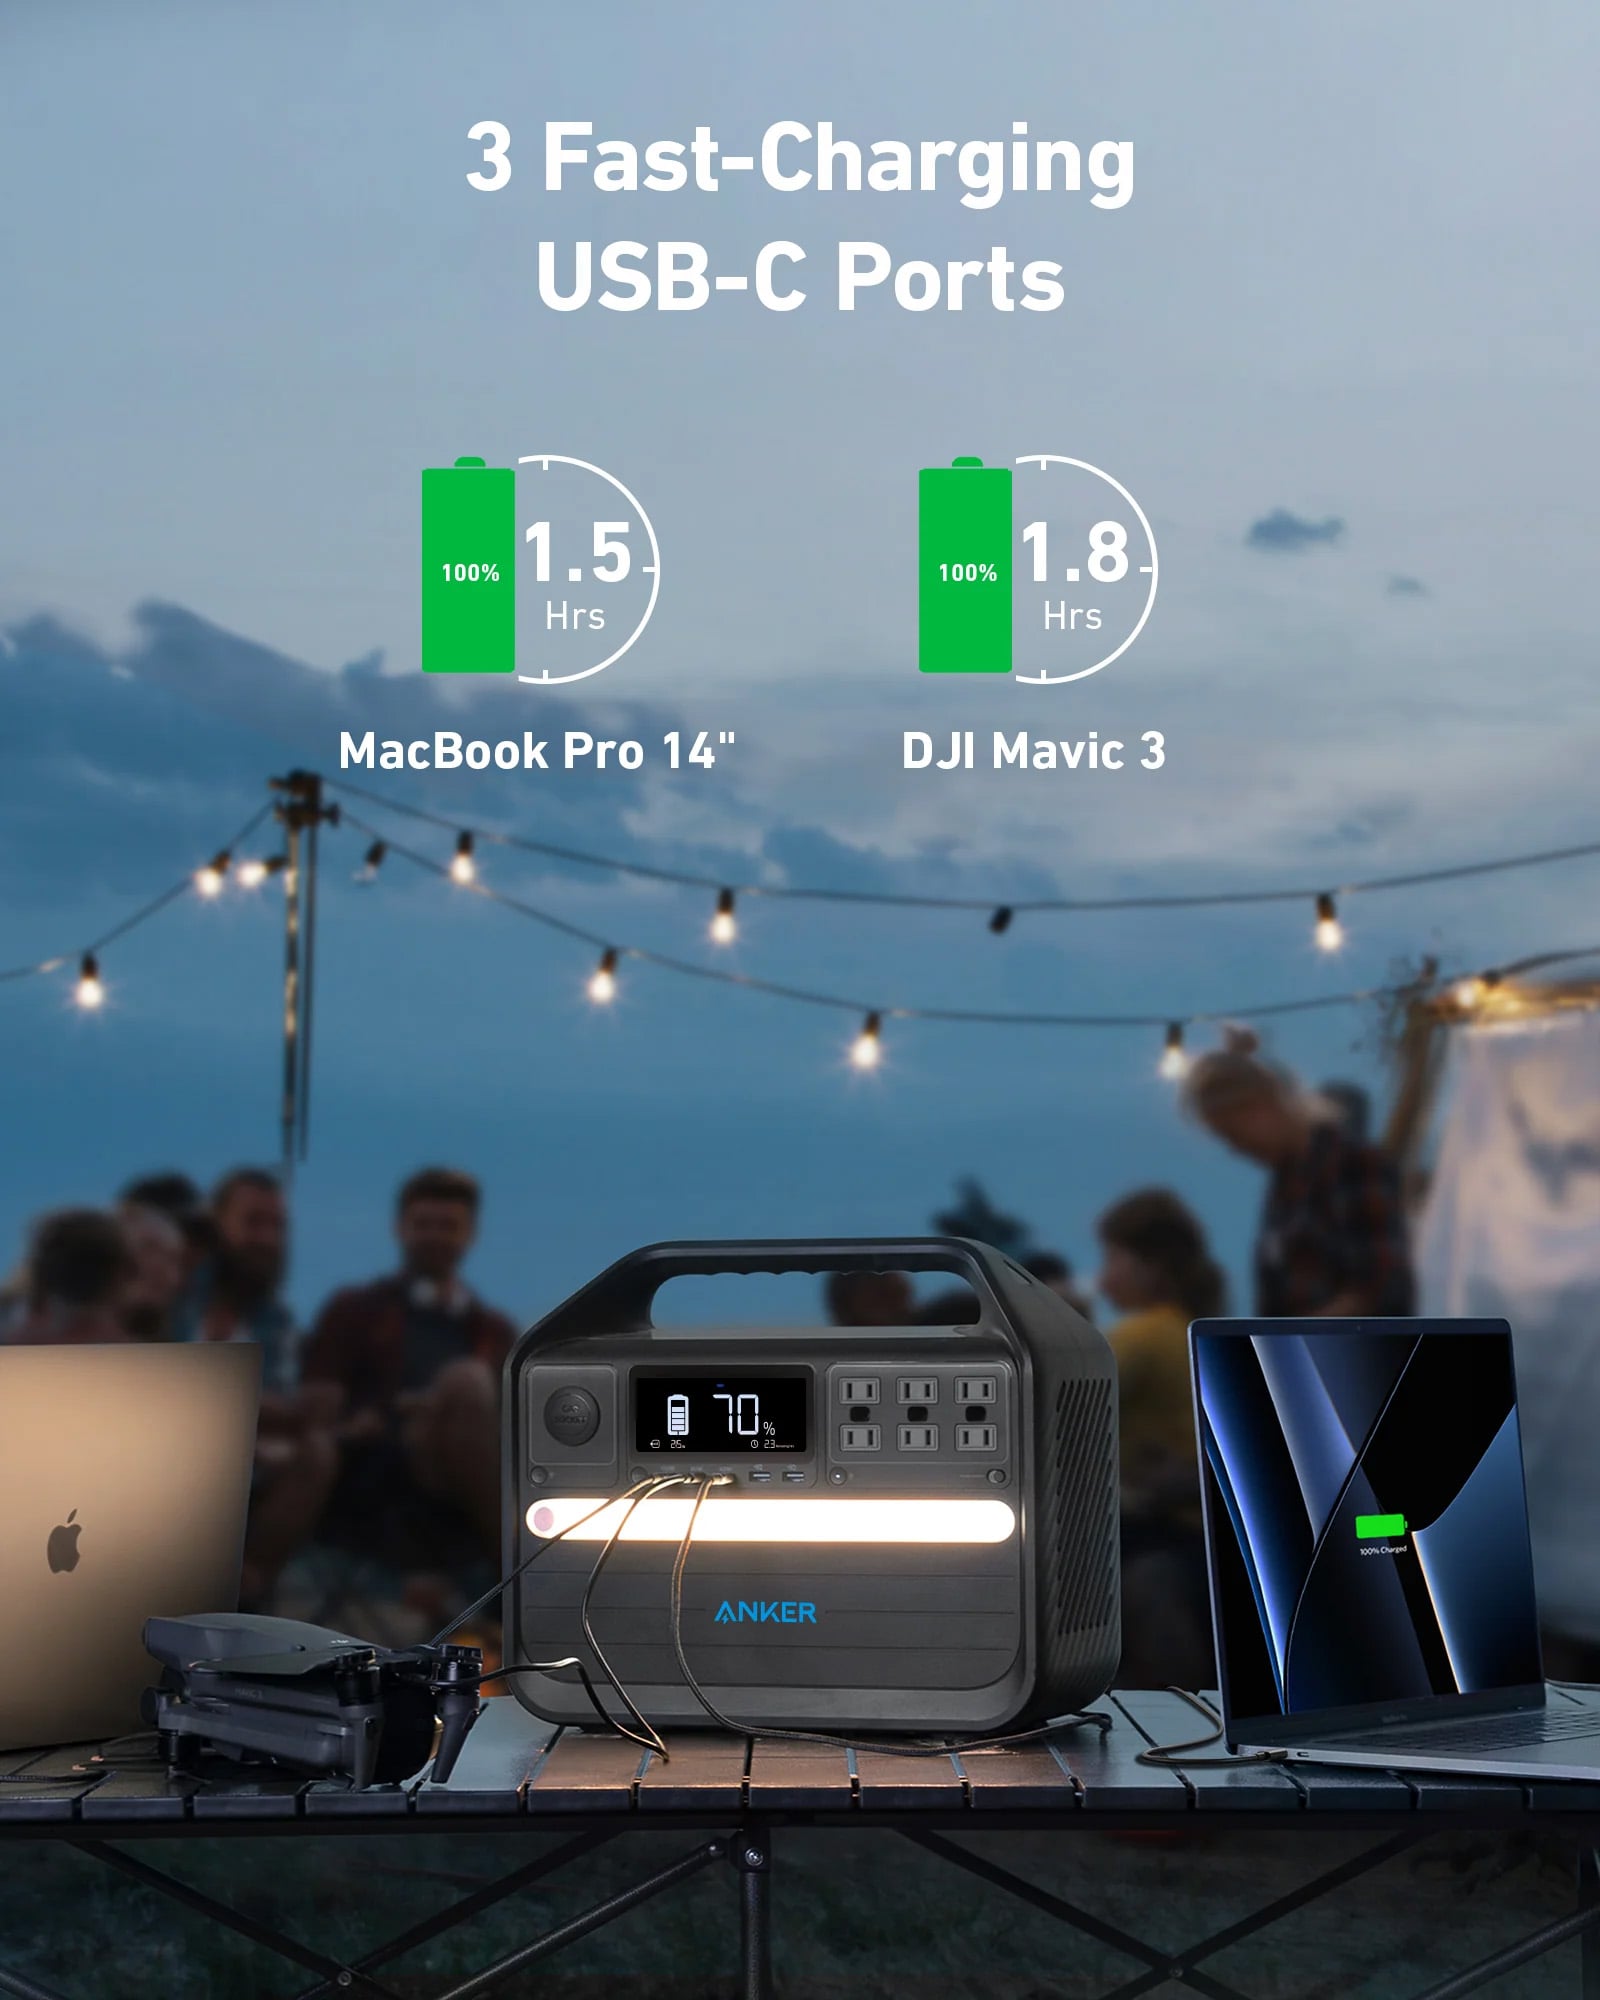 The PowerHouse 1024Wh Has 3 Fast-Charging USB-C Ports